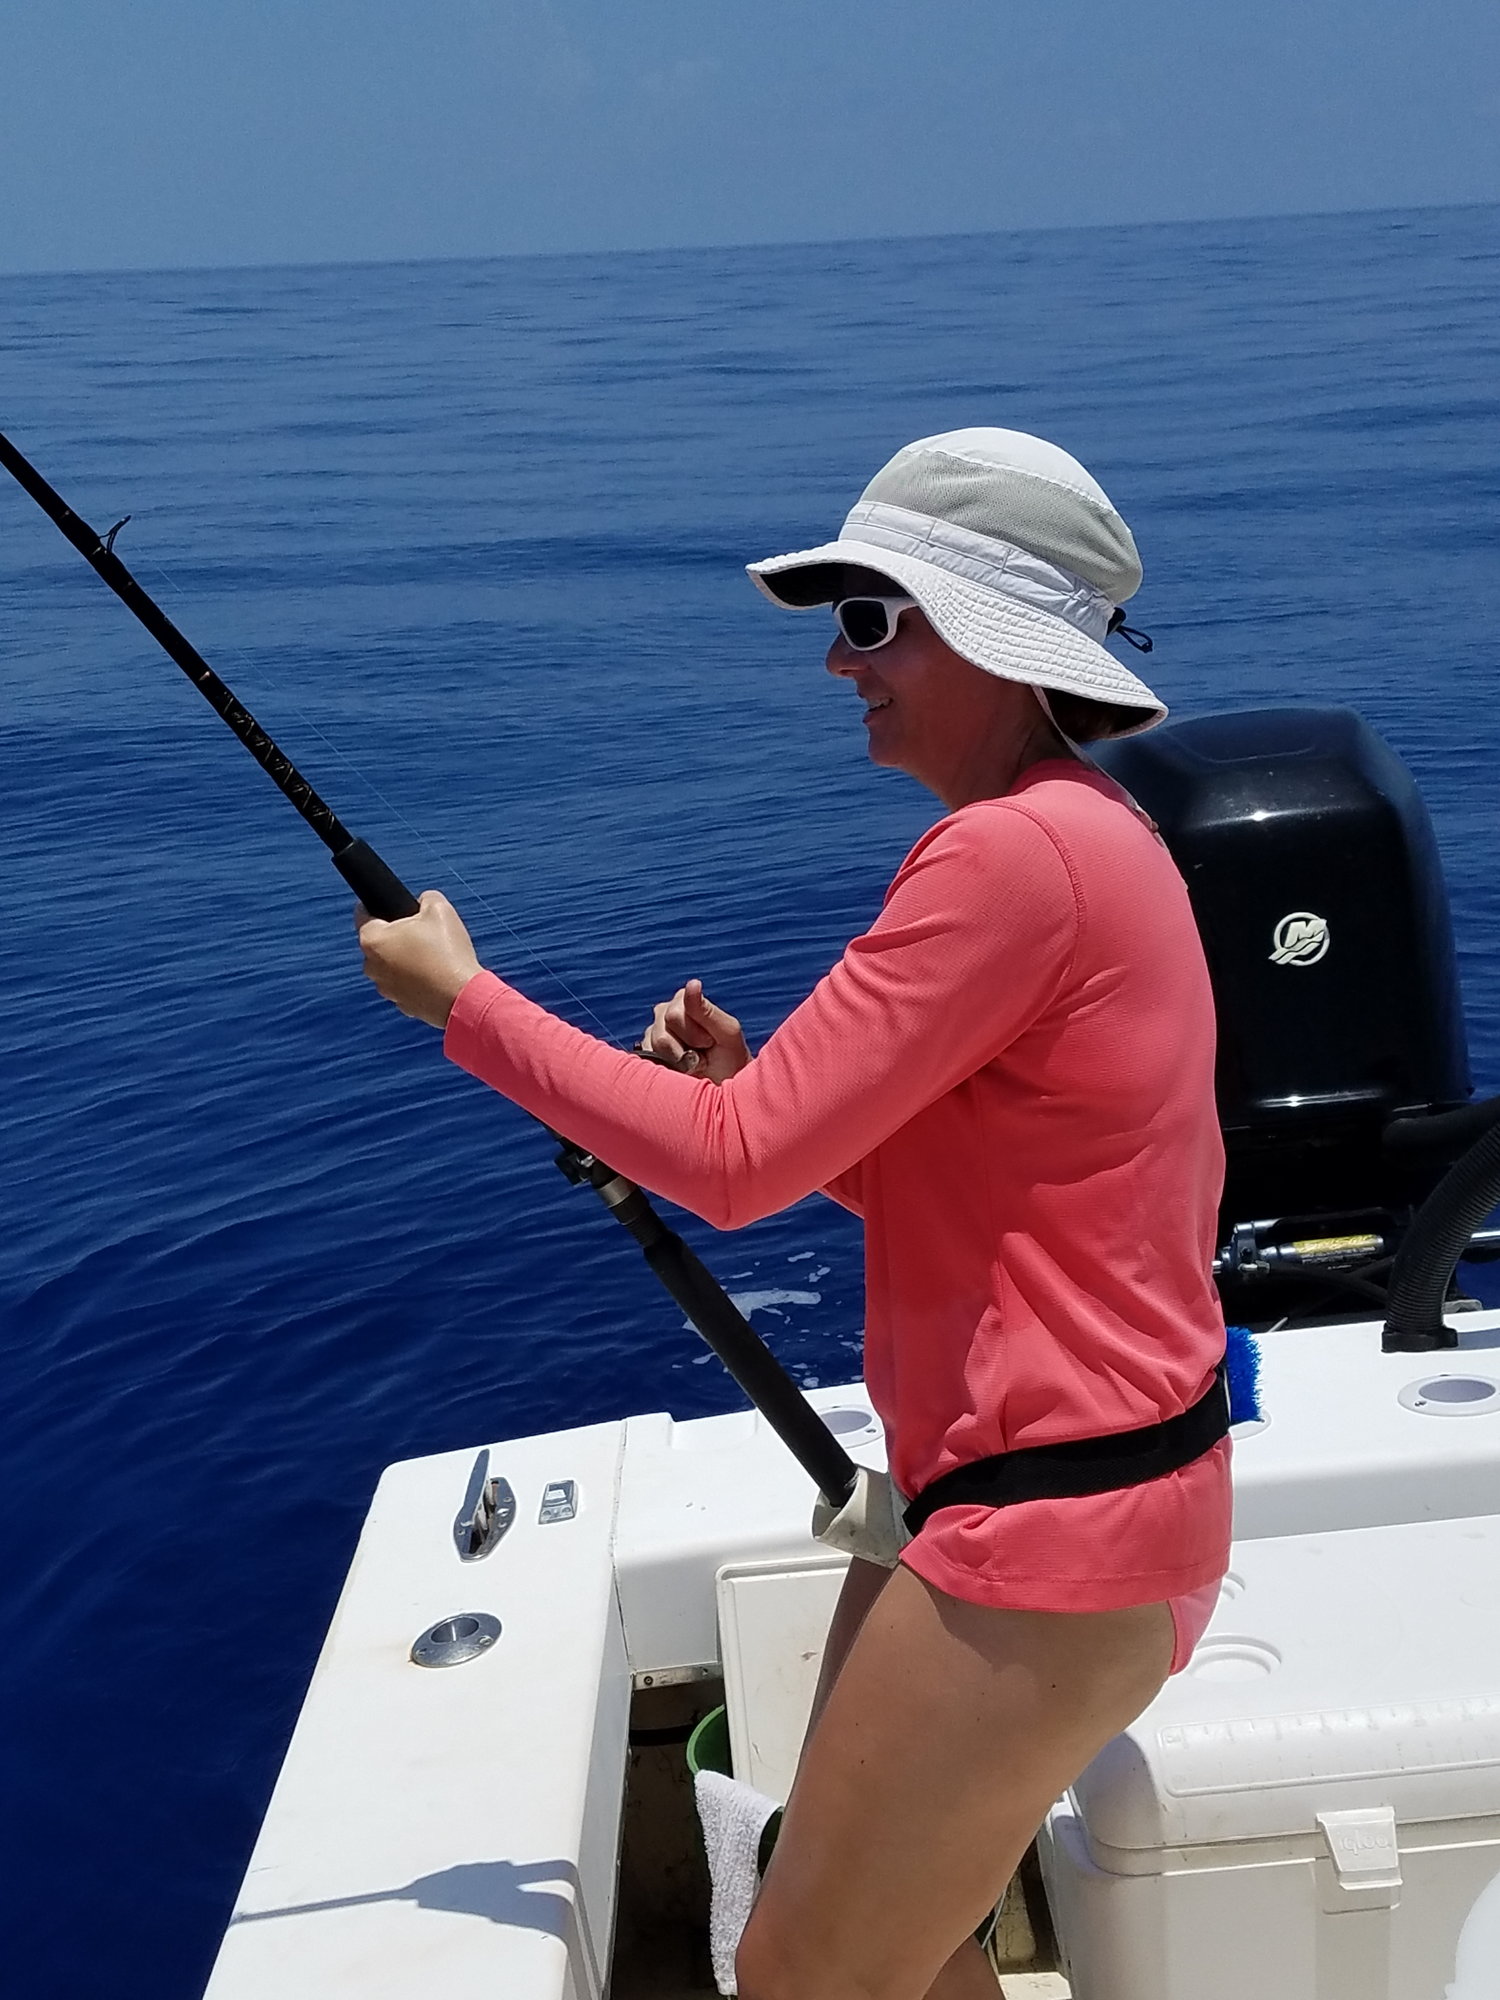 Post Pictures of Your Wife or Girlfriend Who Loves To Fish - Page 3 - The  Hull Truth - Boating and Fishing Forum